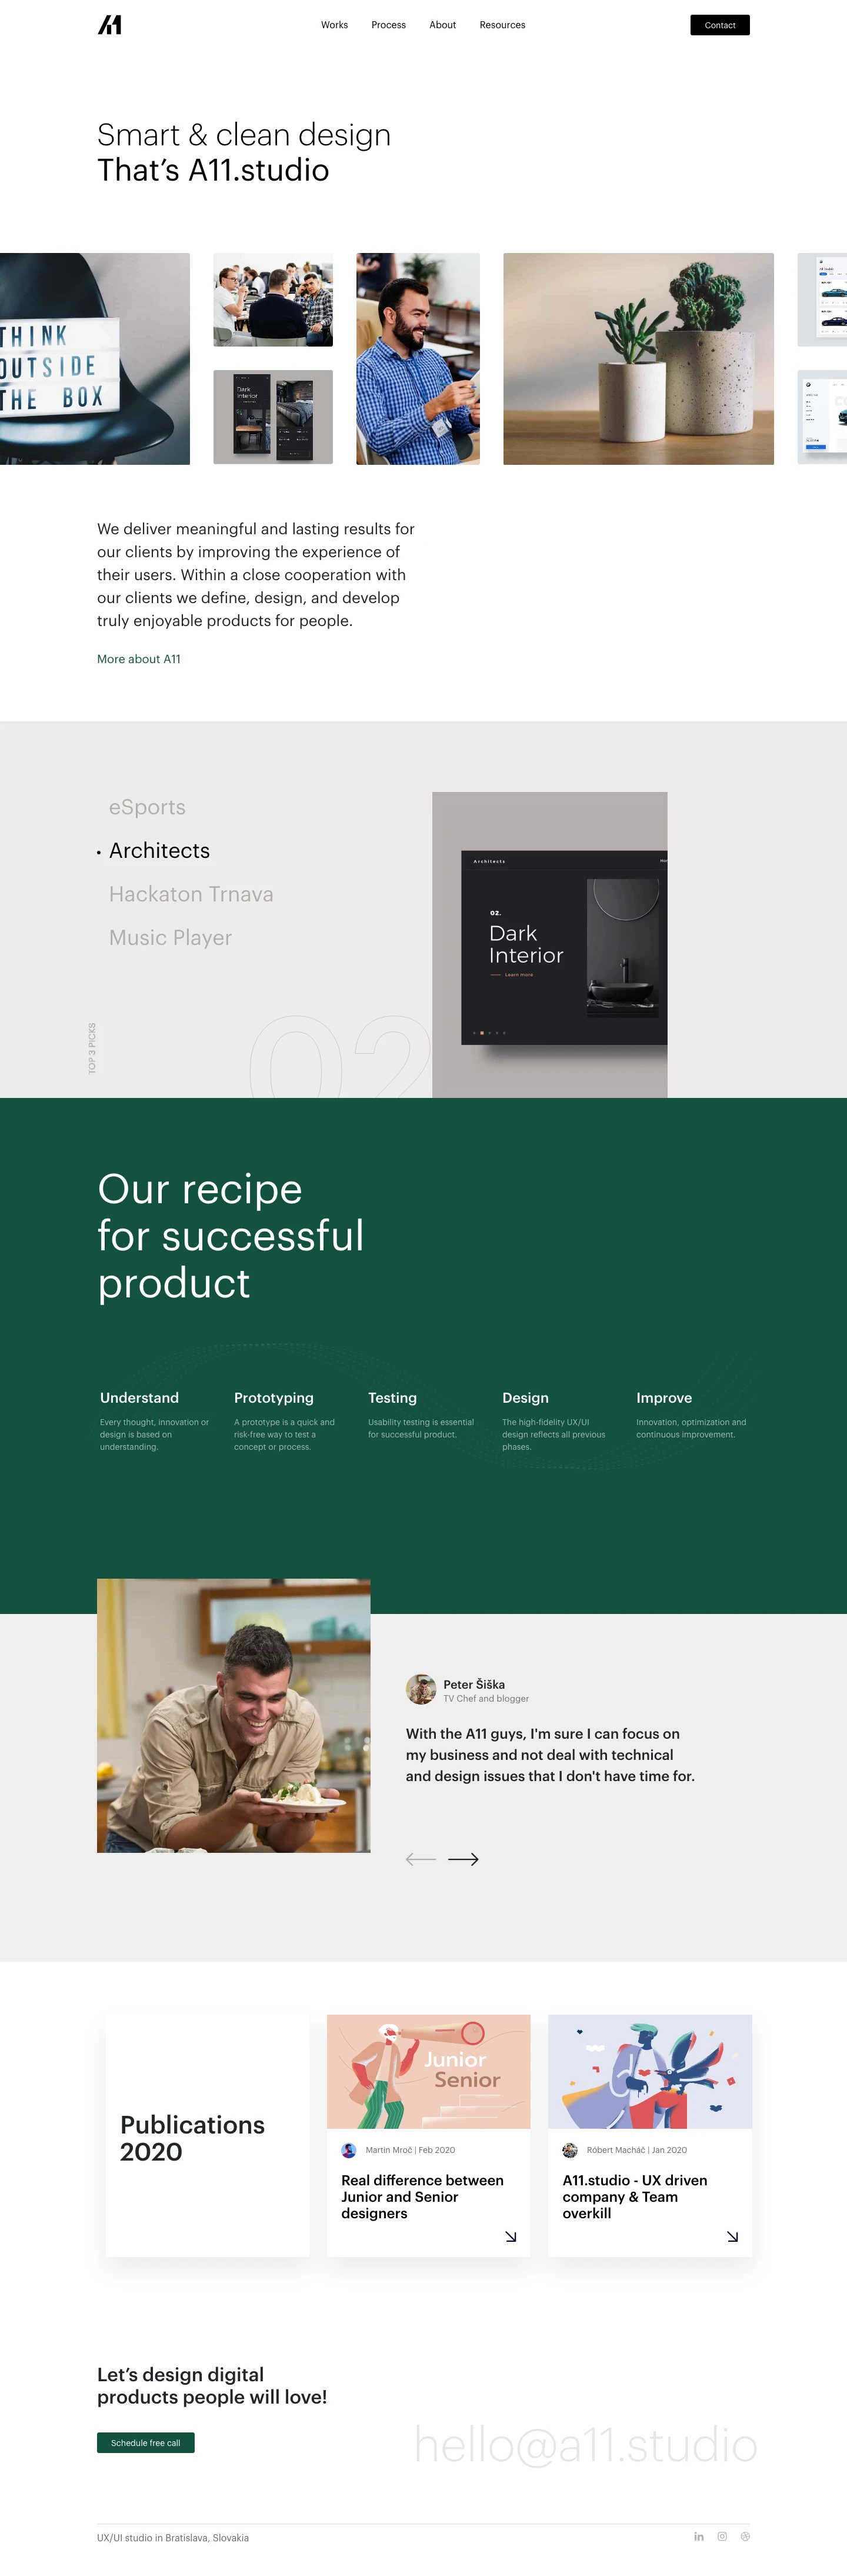 A11.studio Landing Page Example: We deliver meaningful and lasting results for our clients by improving the experience of their users. Within a close cooperation with our clients we define, design, and develop truly enjoyable products for people.